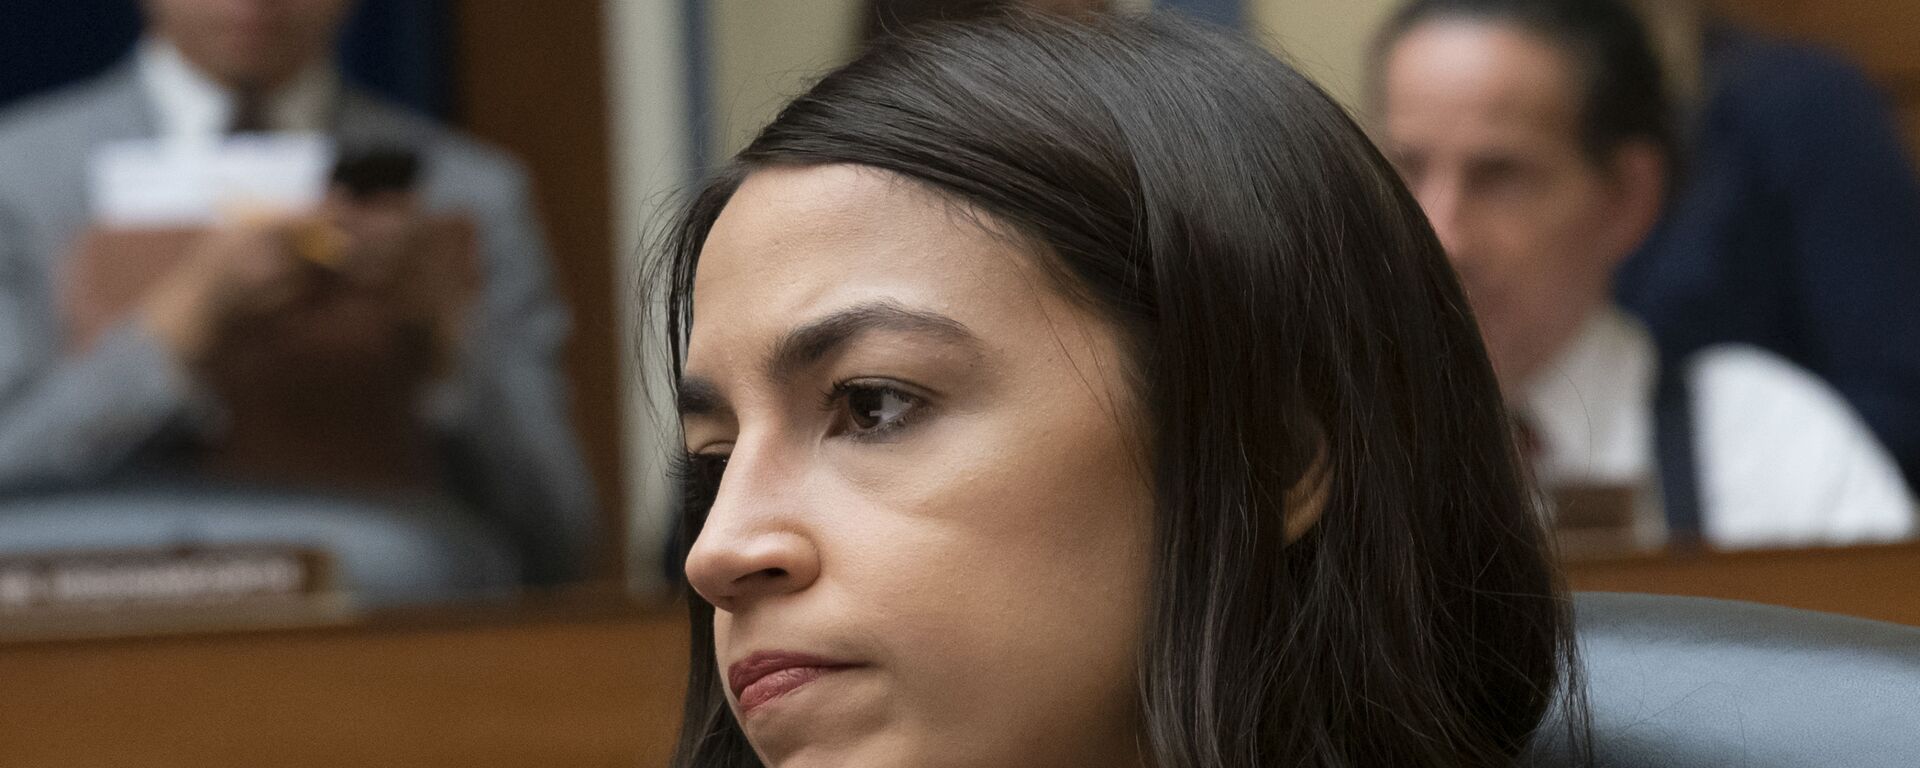 Rep. Alexandria Ocasio-Cortez, D-N.Y., attends a House Oversight Committee hearing on high prescription drugs prices shortly after her private meeting with Speaker of the House Nancy Pelosi, D-Calif., on Capitol Hill in Washington, Friday, July 26, 2019 - Sputnik International, 1920, 11.01.2023